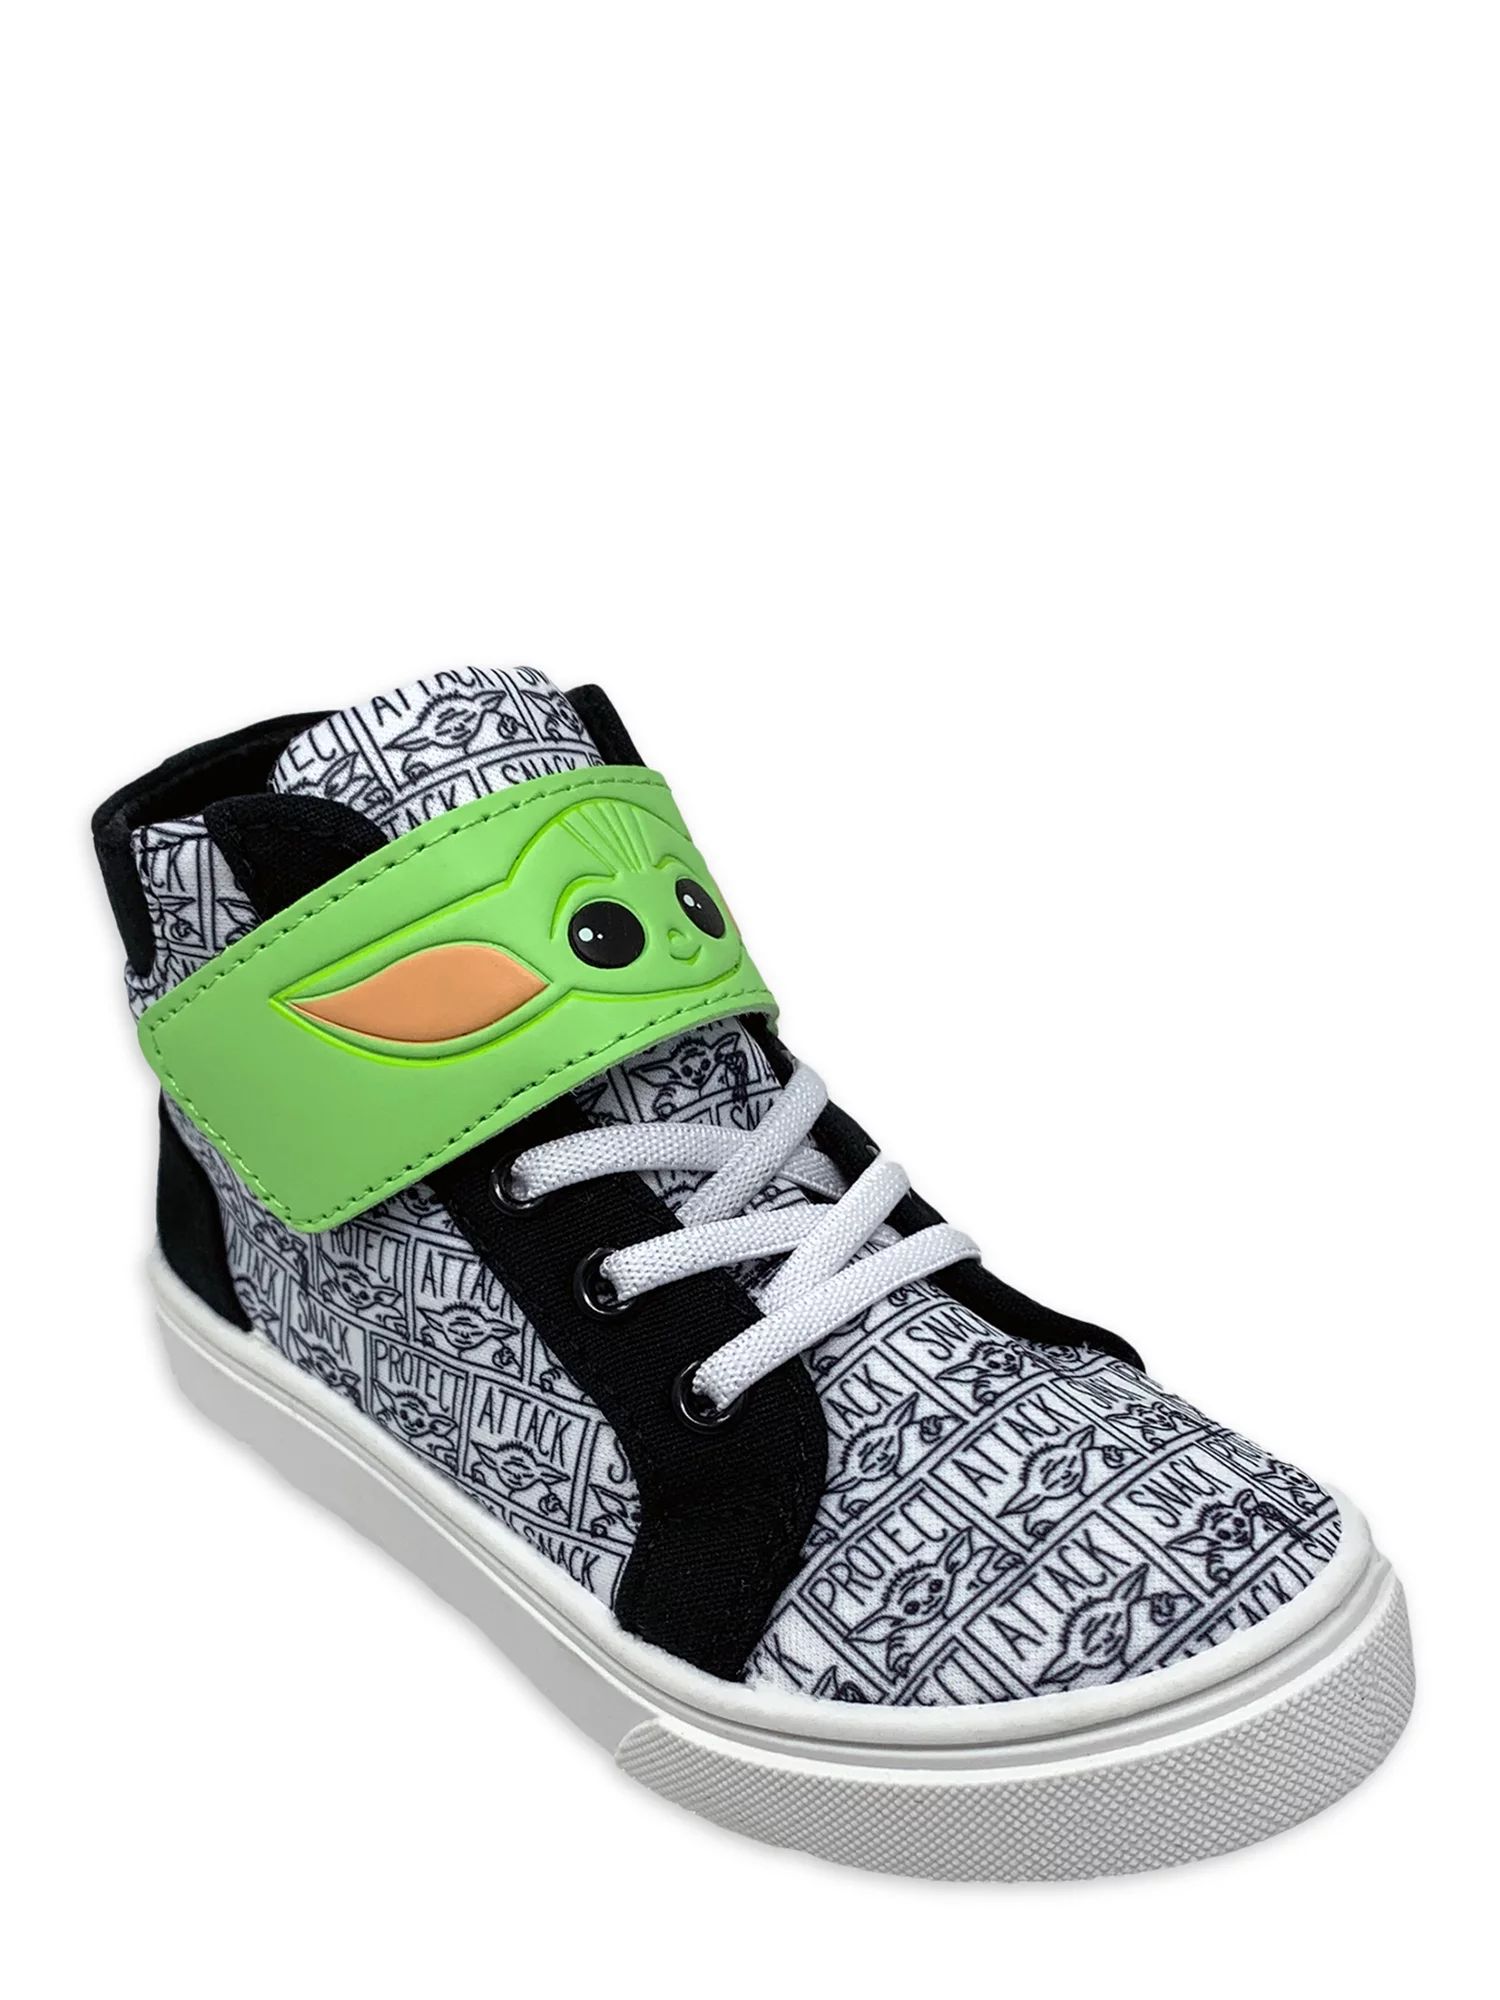 Baby Yoda Toddler Boys License Casual High-Top Sneakers, Sizes 8-13 | Walmart (US)